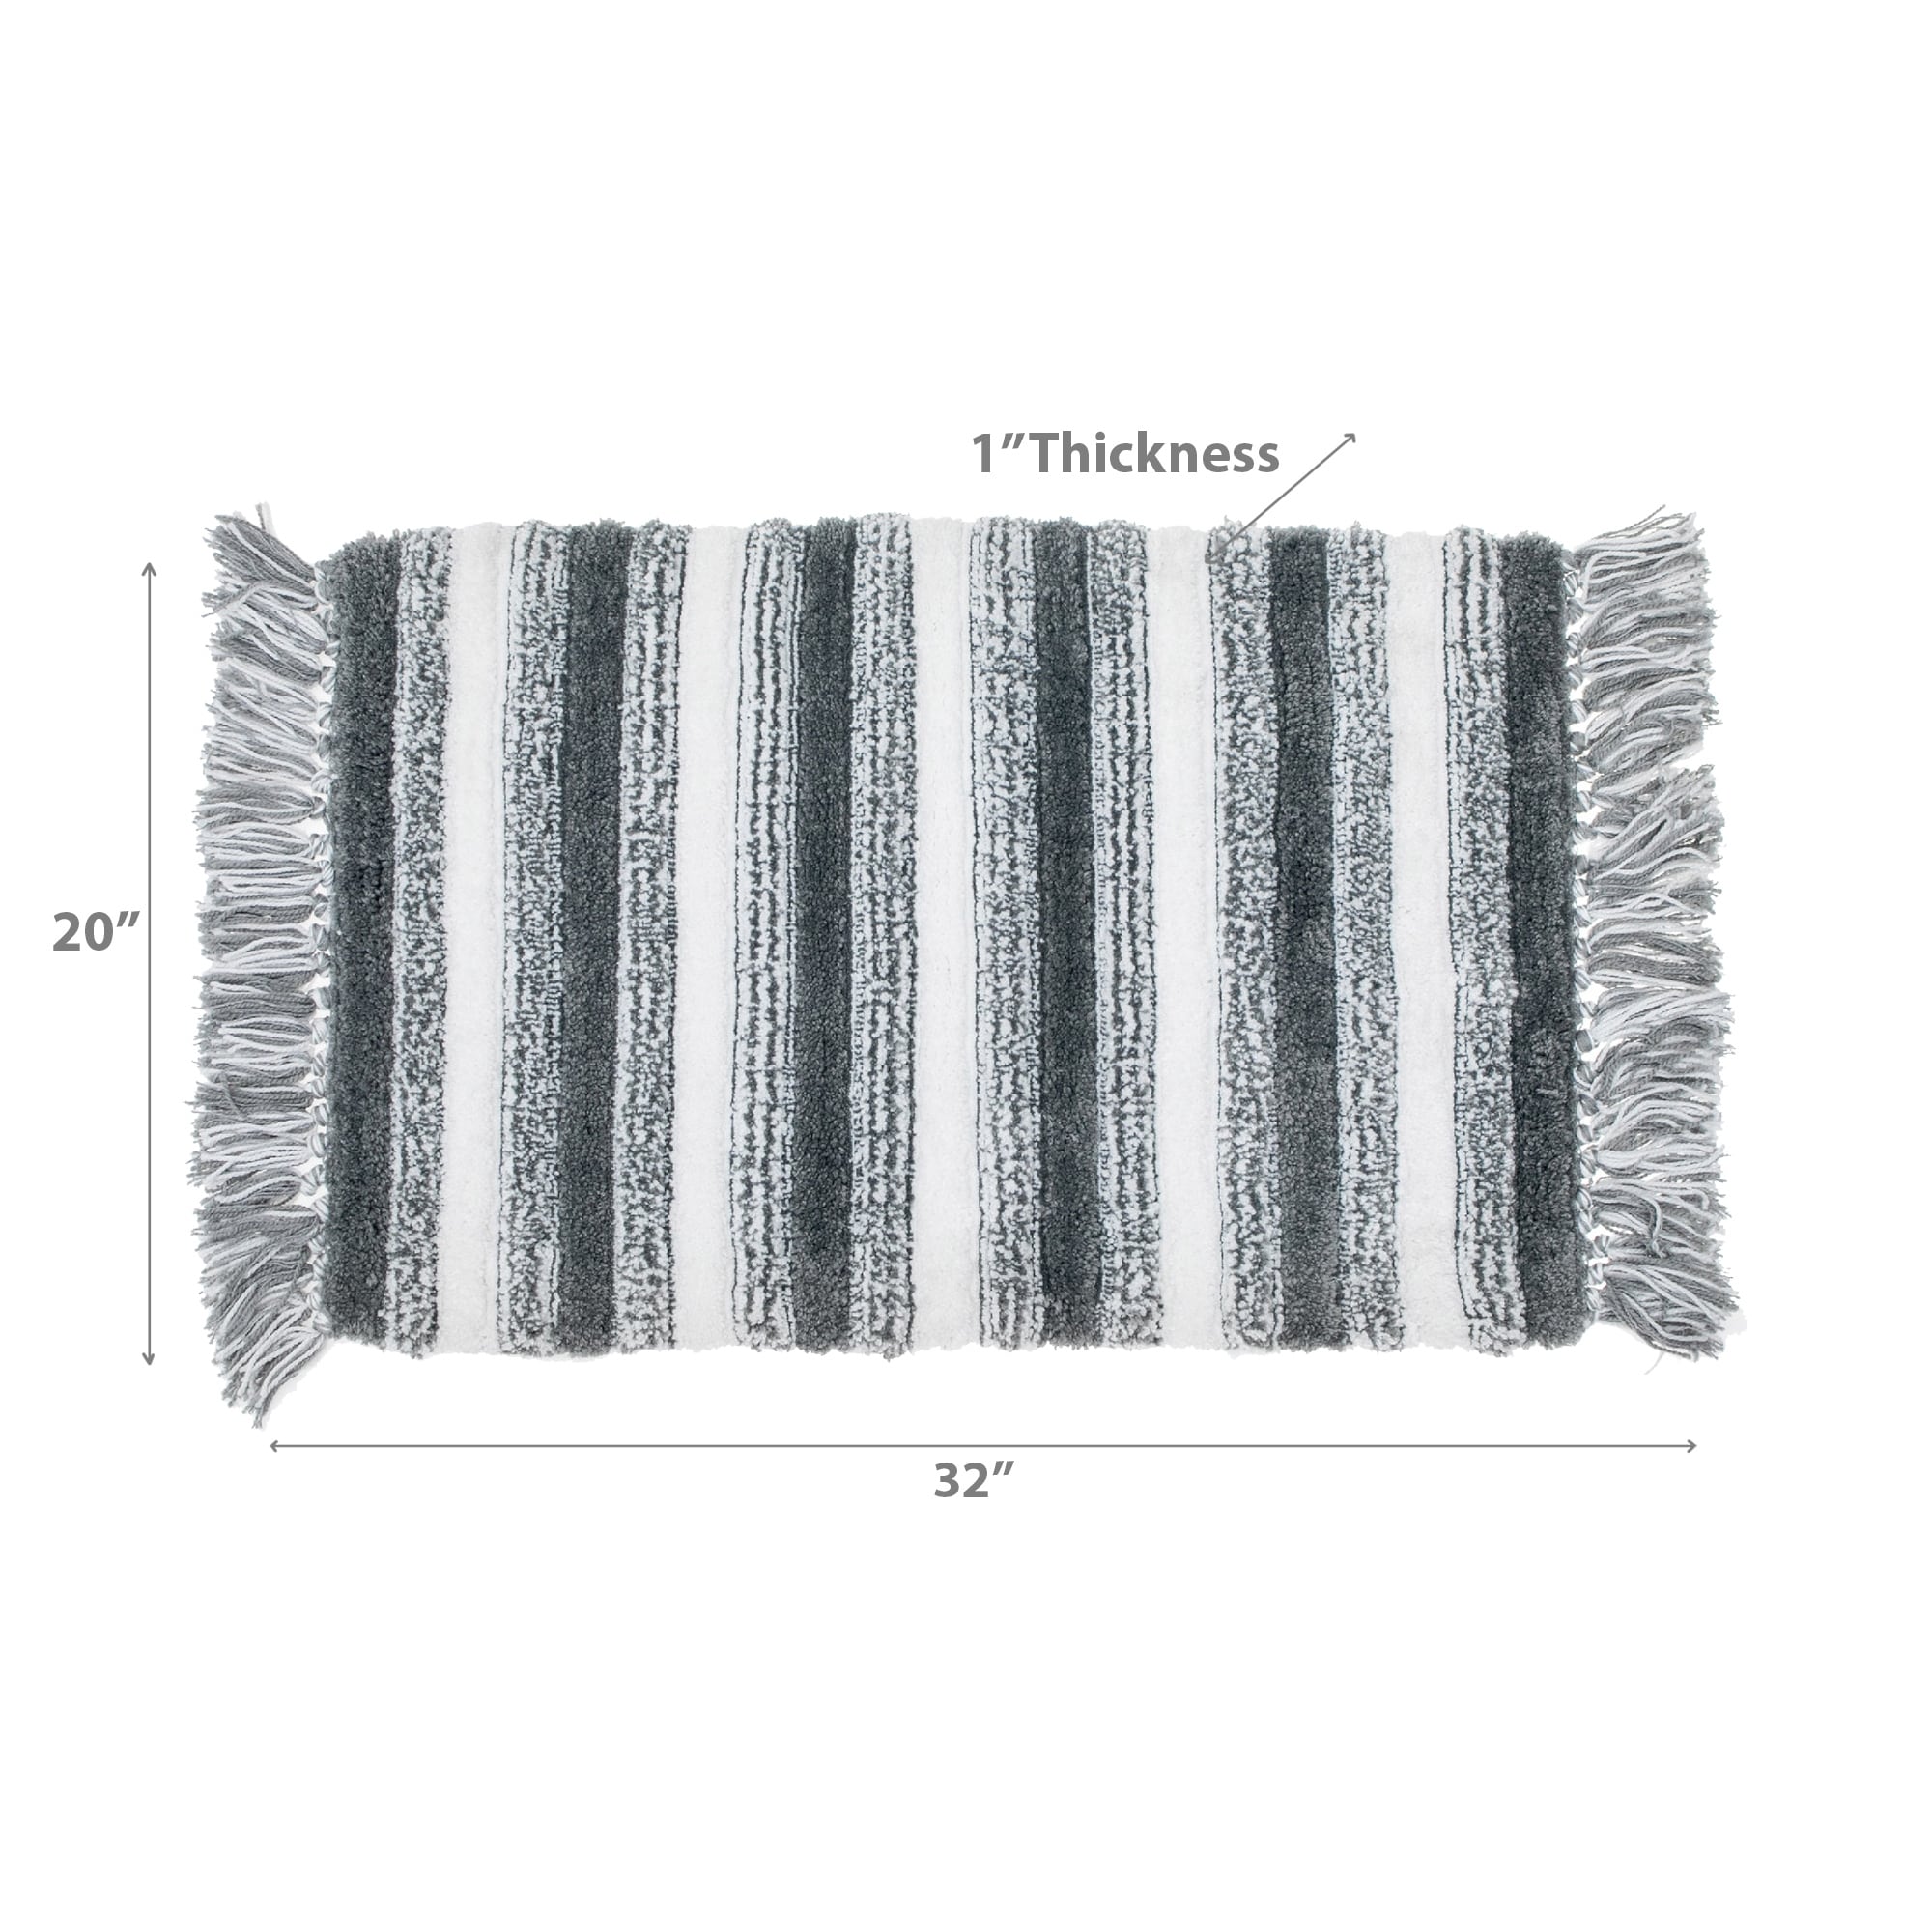 https://ak1.ostkcdn.com/images/products/is/images/direct/cda2bd0a98982400cefe8ac948d2fe99a6661d09/Microfibre-Striped-Bath-Mat-With-Fringe-Gray-20X32.jpg